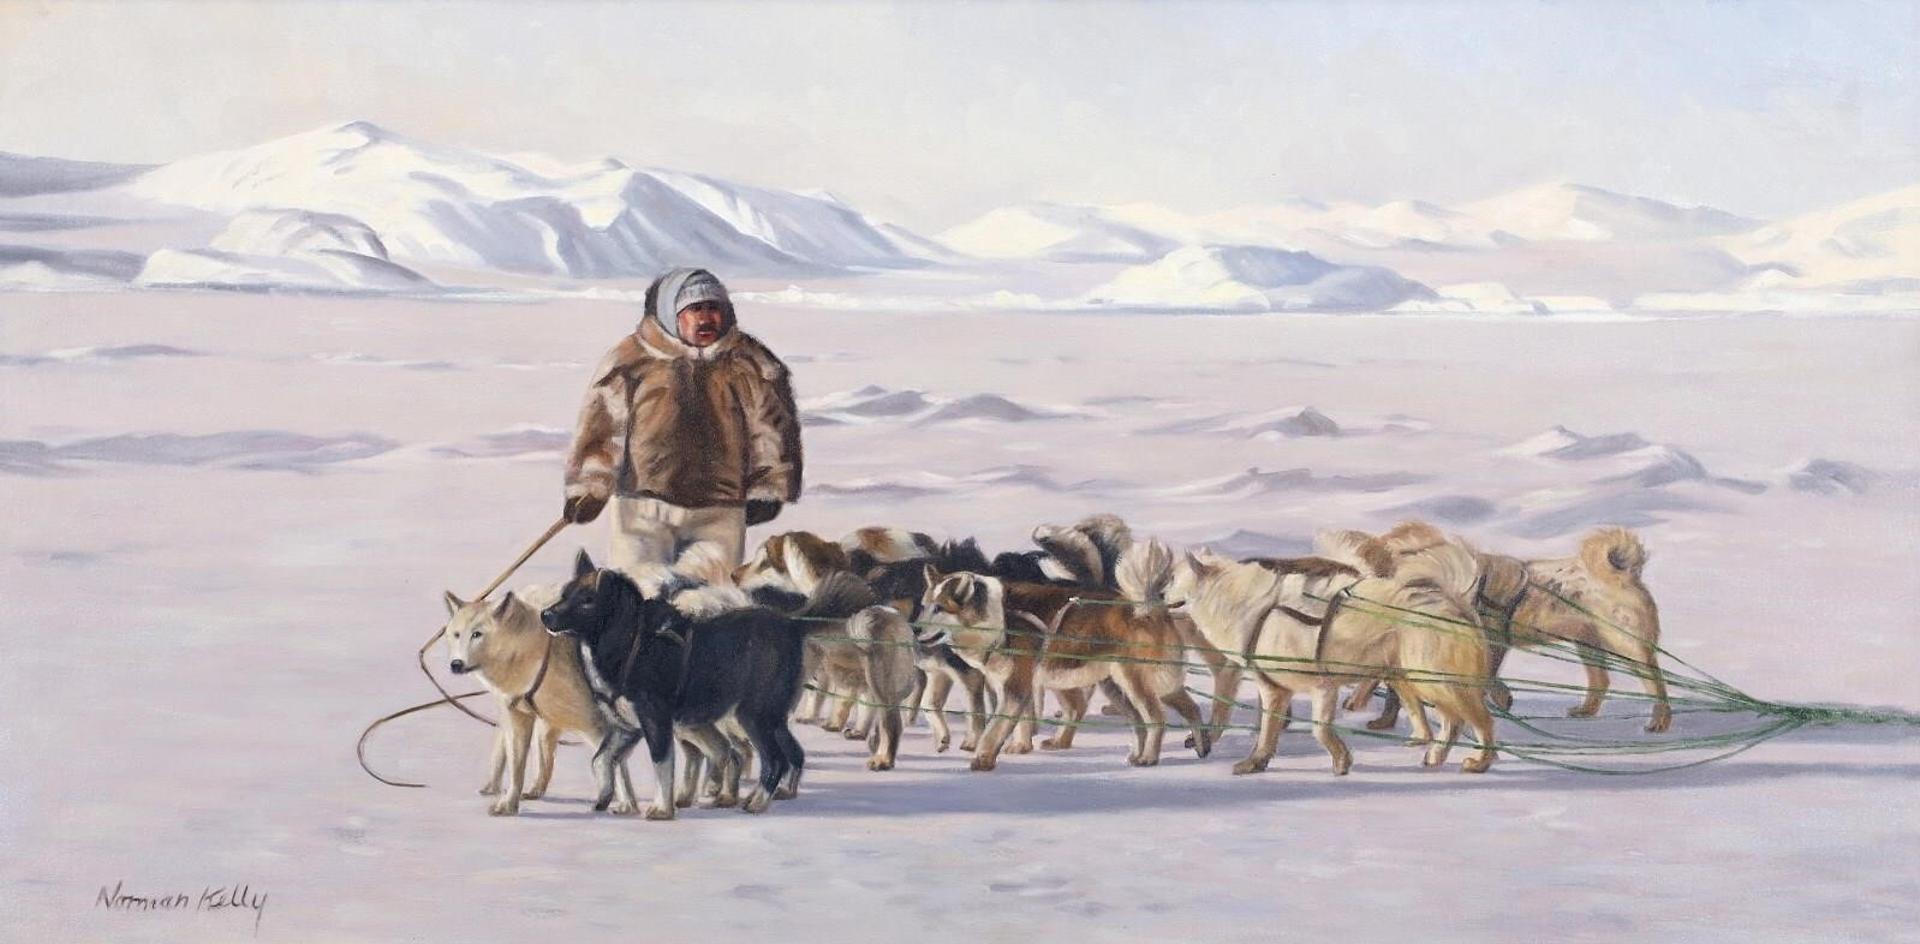 Norman Kelly (1939) - Northern Scene With Dog Sled Team